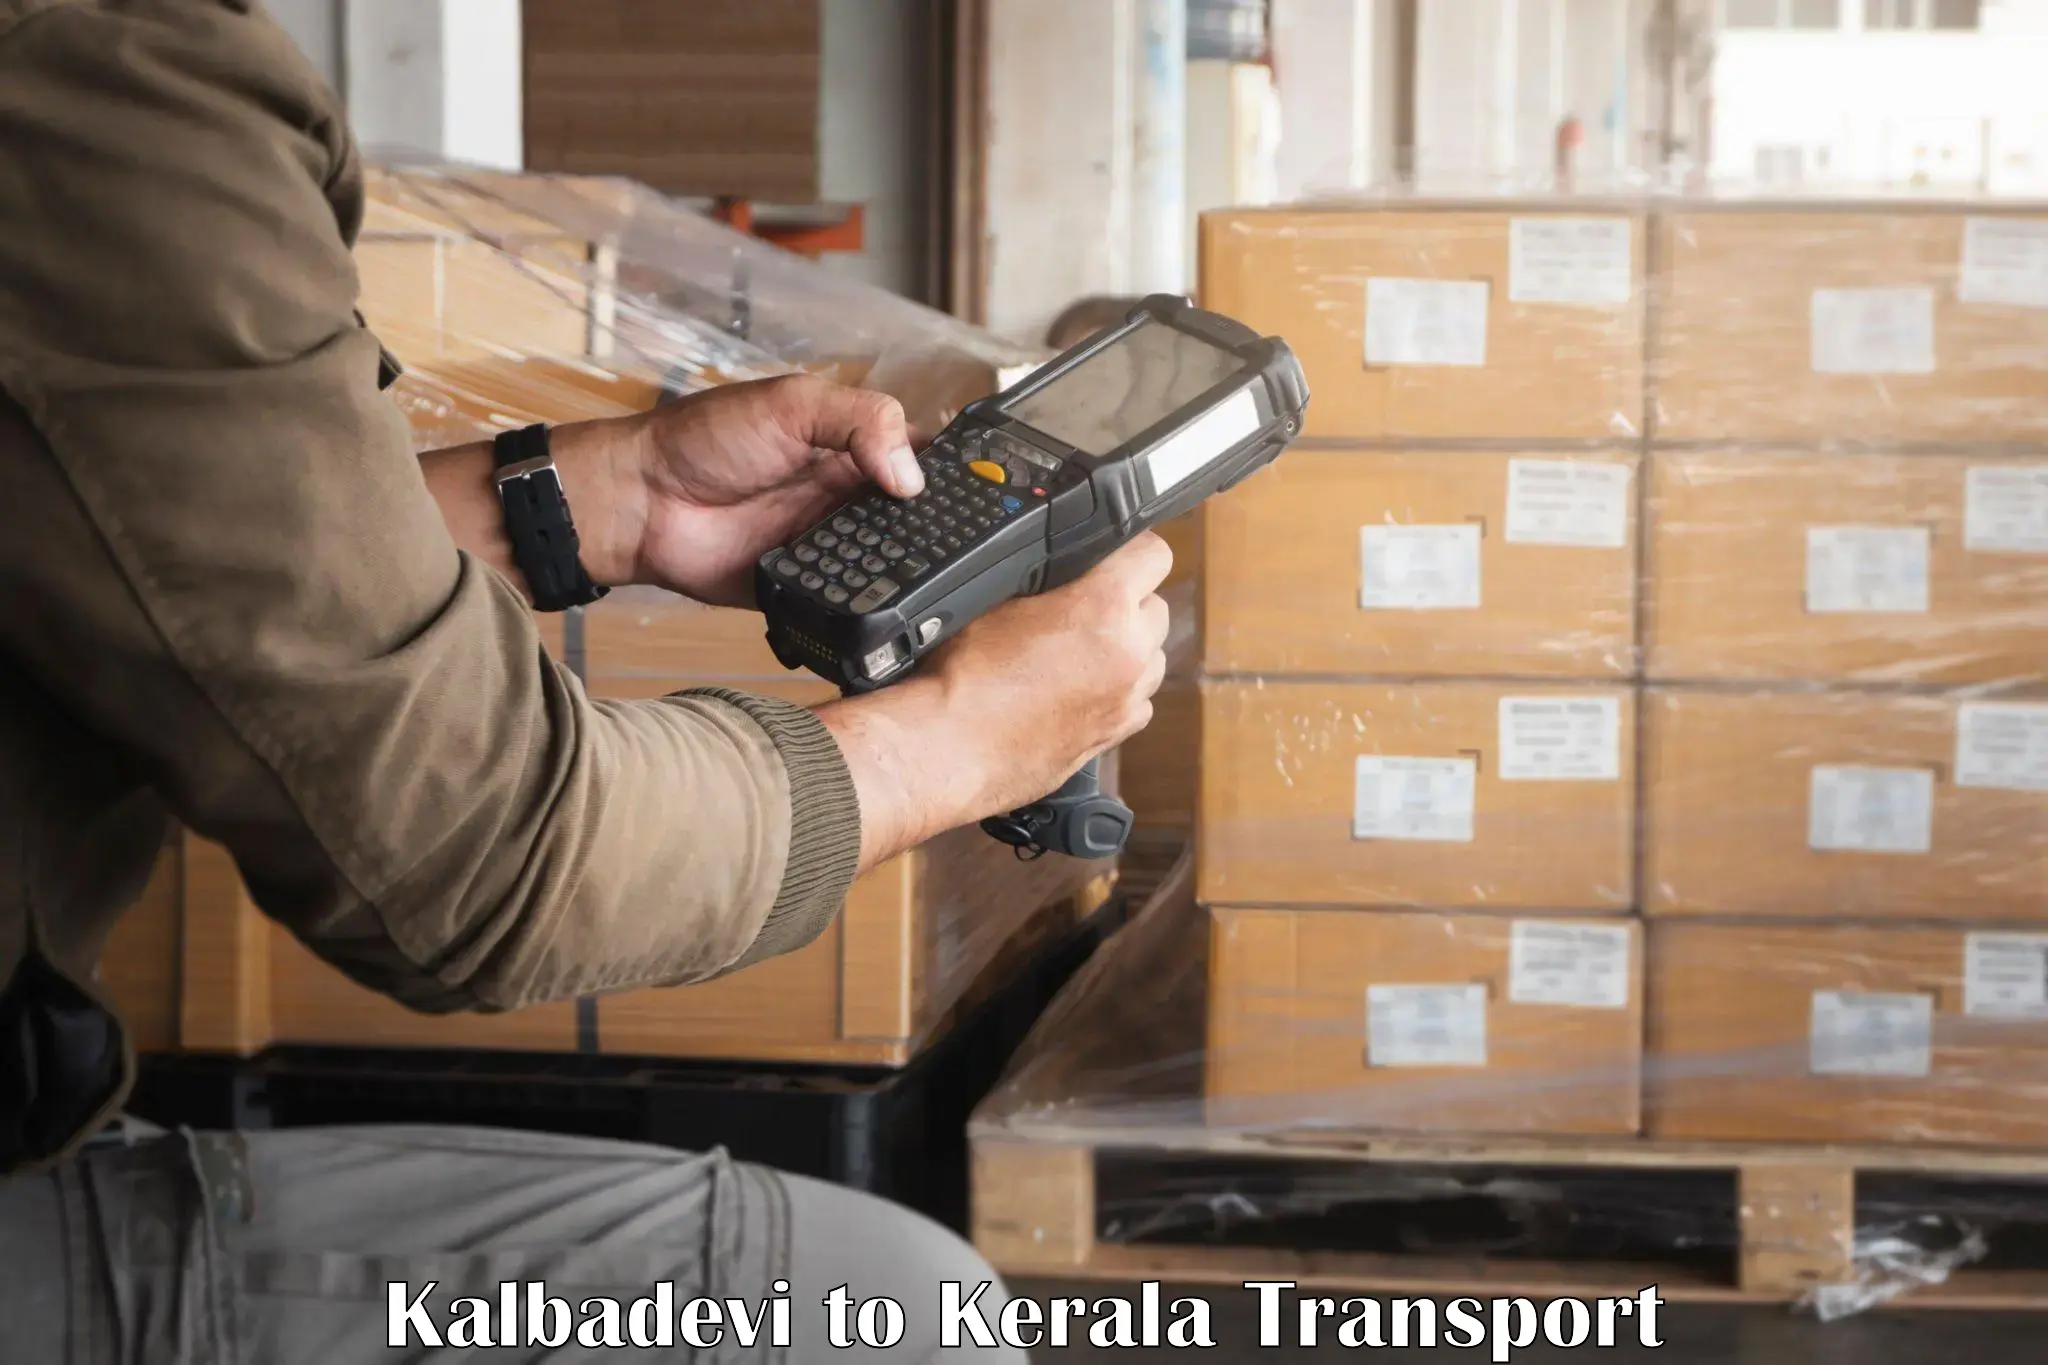 Delivery service Kalbadevi to Puthukkad